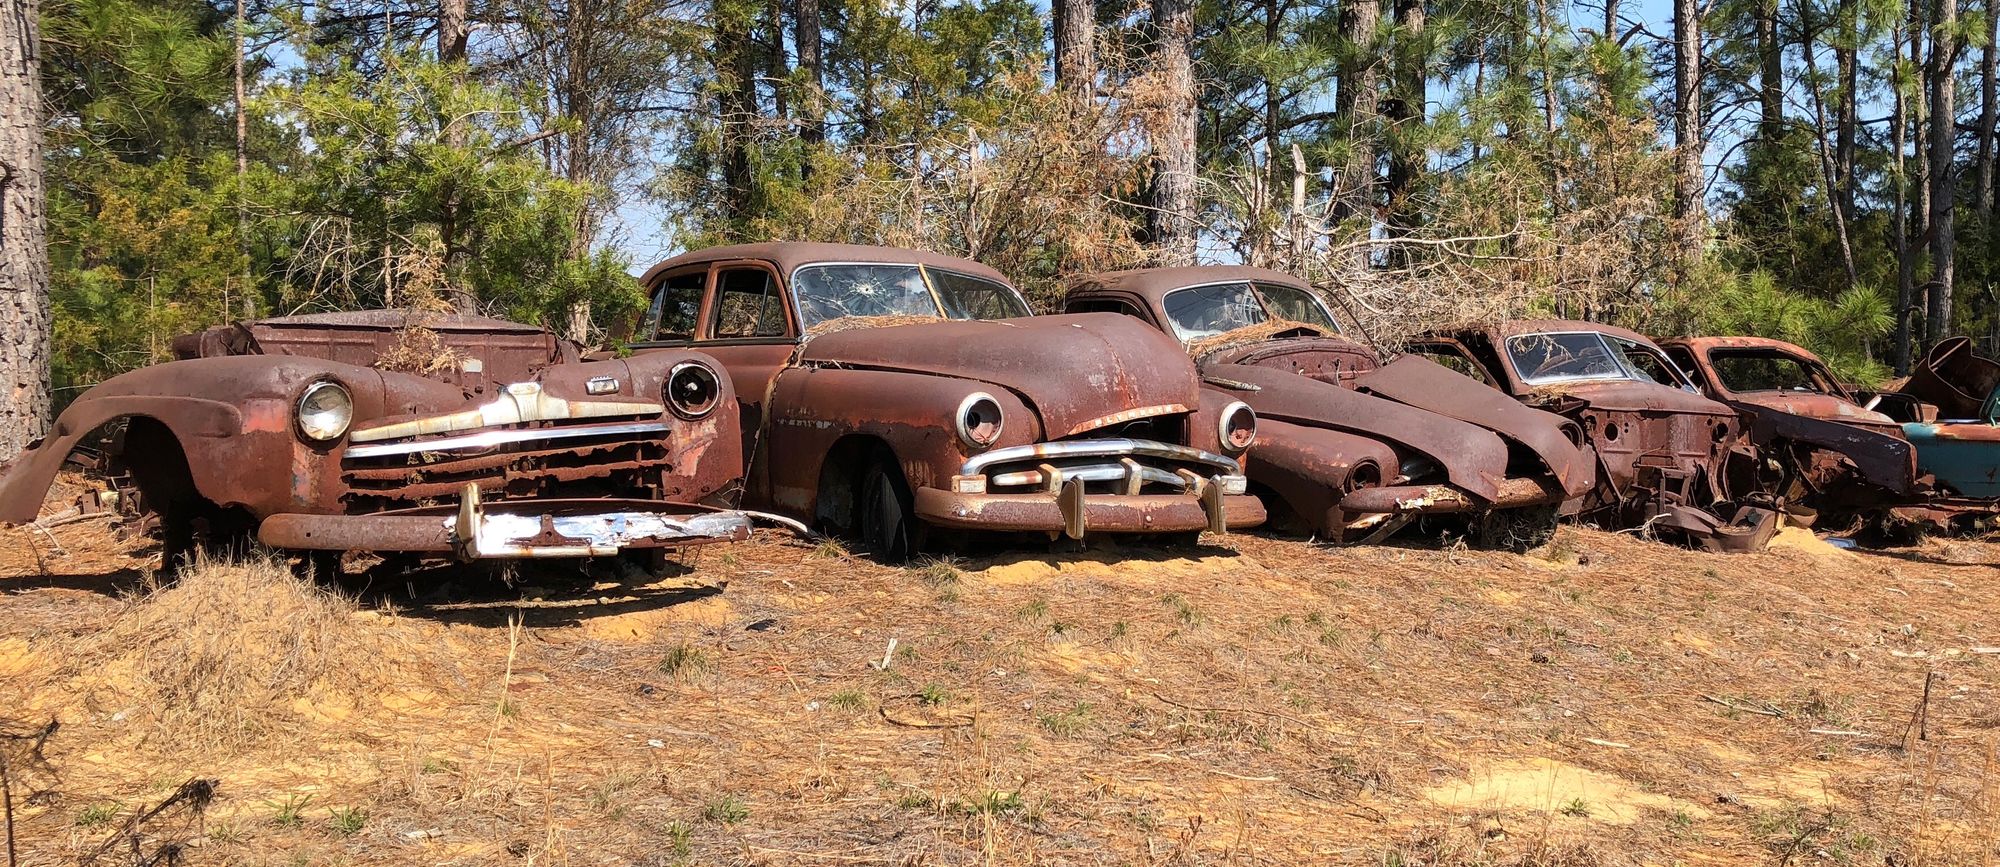 Rusty Relics - Pick Two!